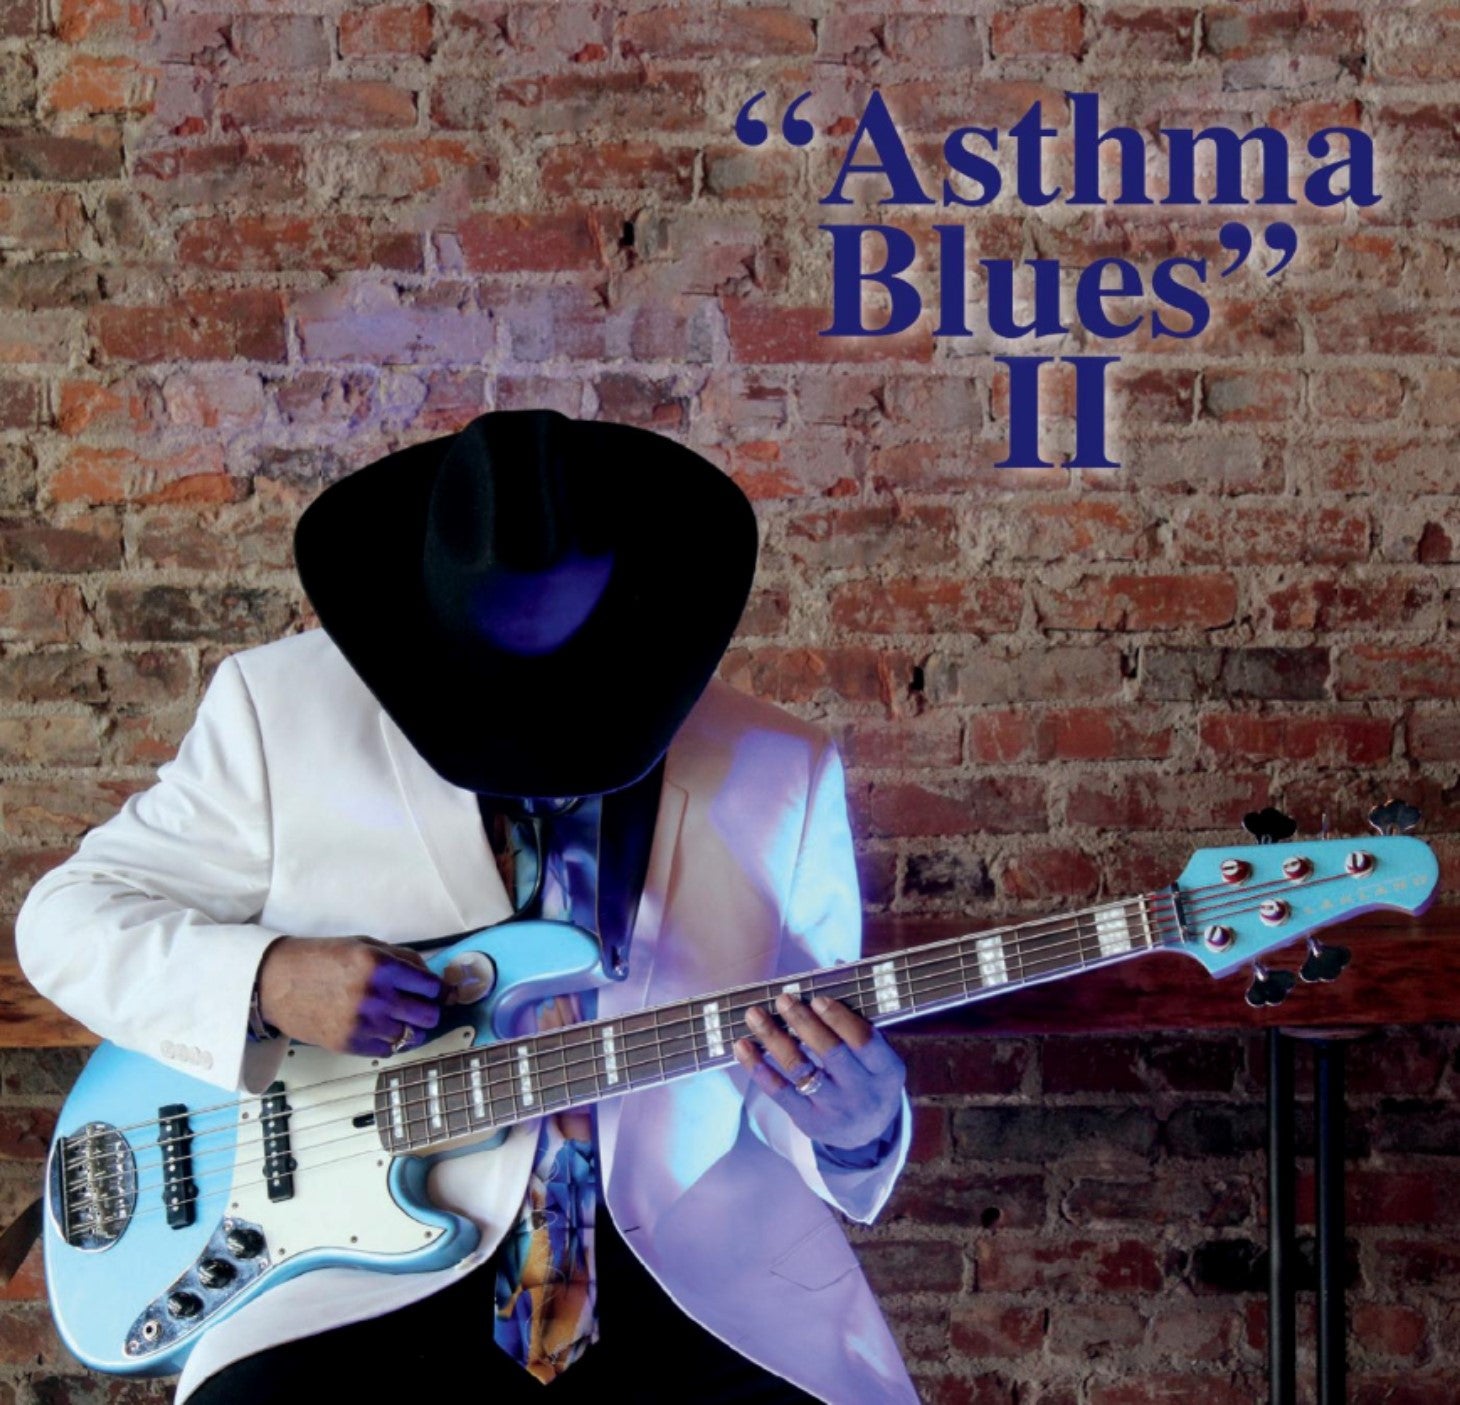 "Asthma Blues"®II-Download To Your Phone!